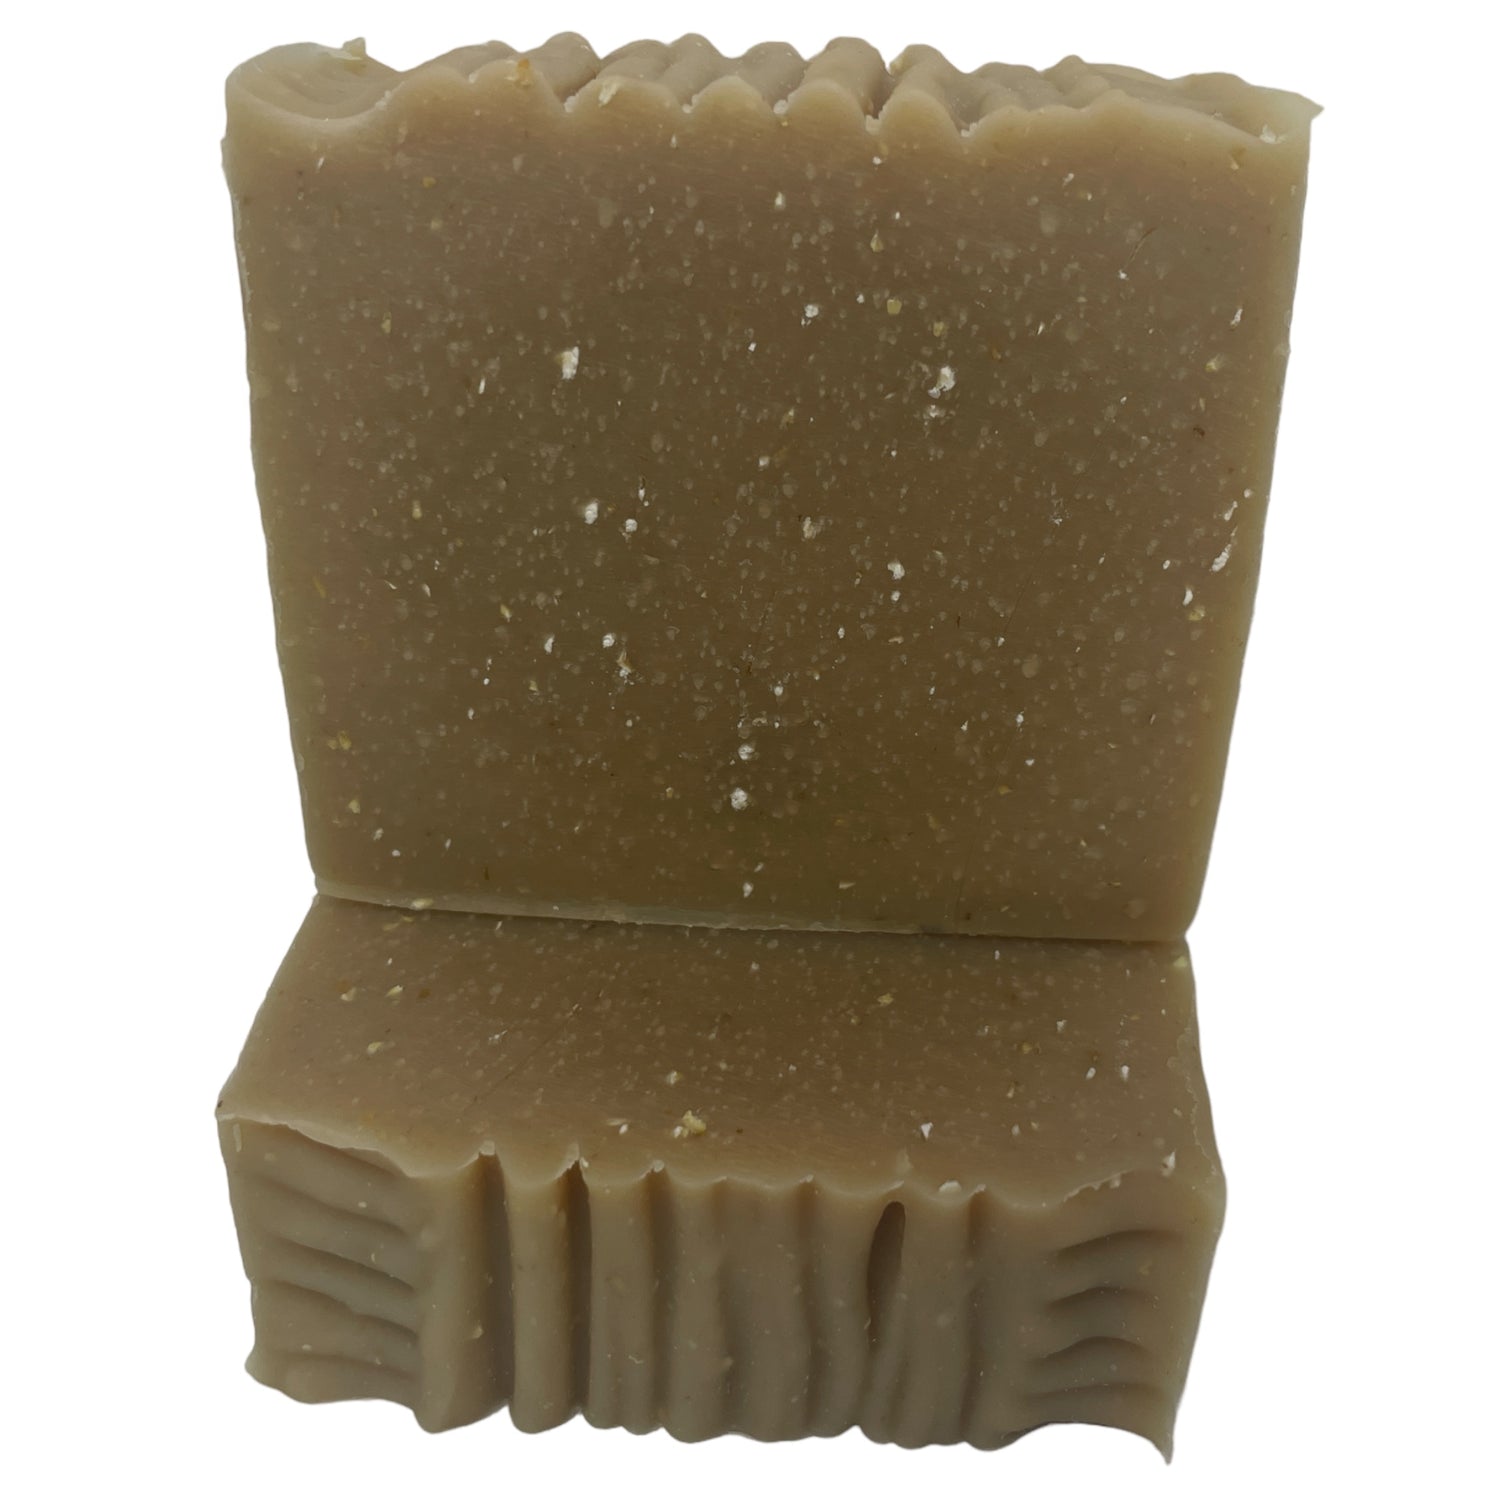 Pine Tar with Oats Goat Milk Soap